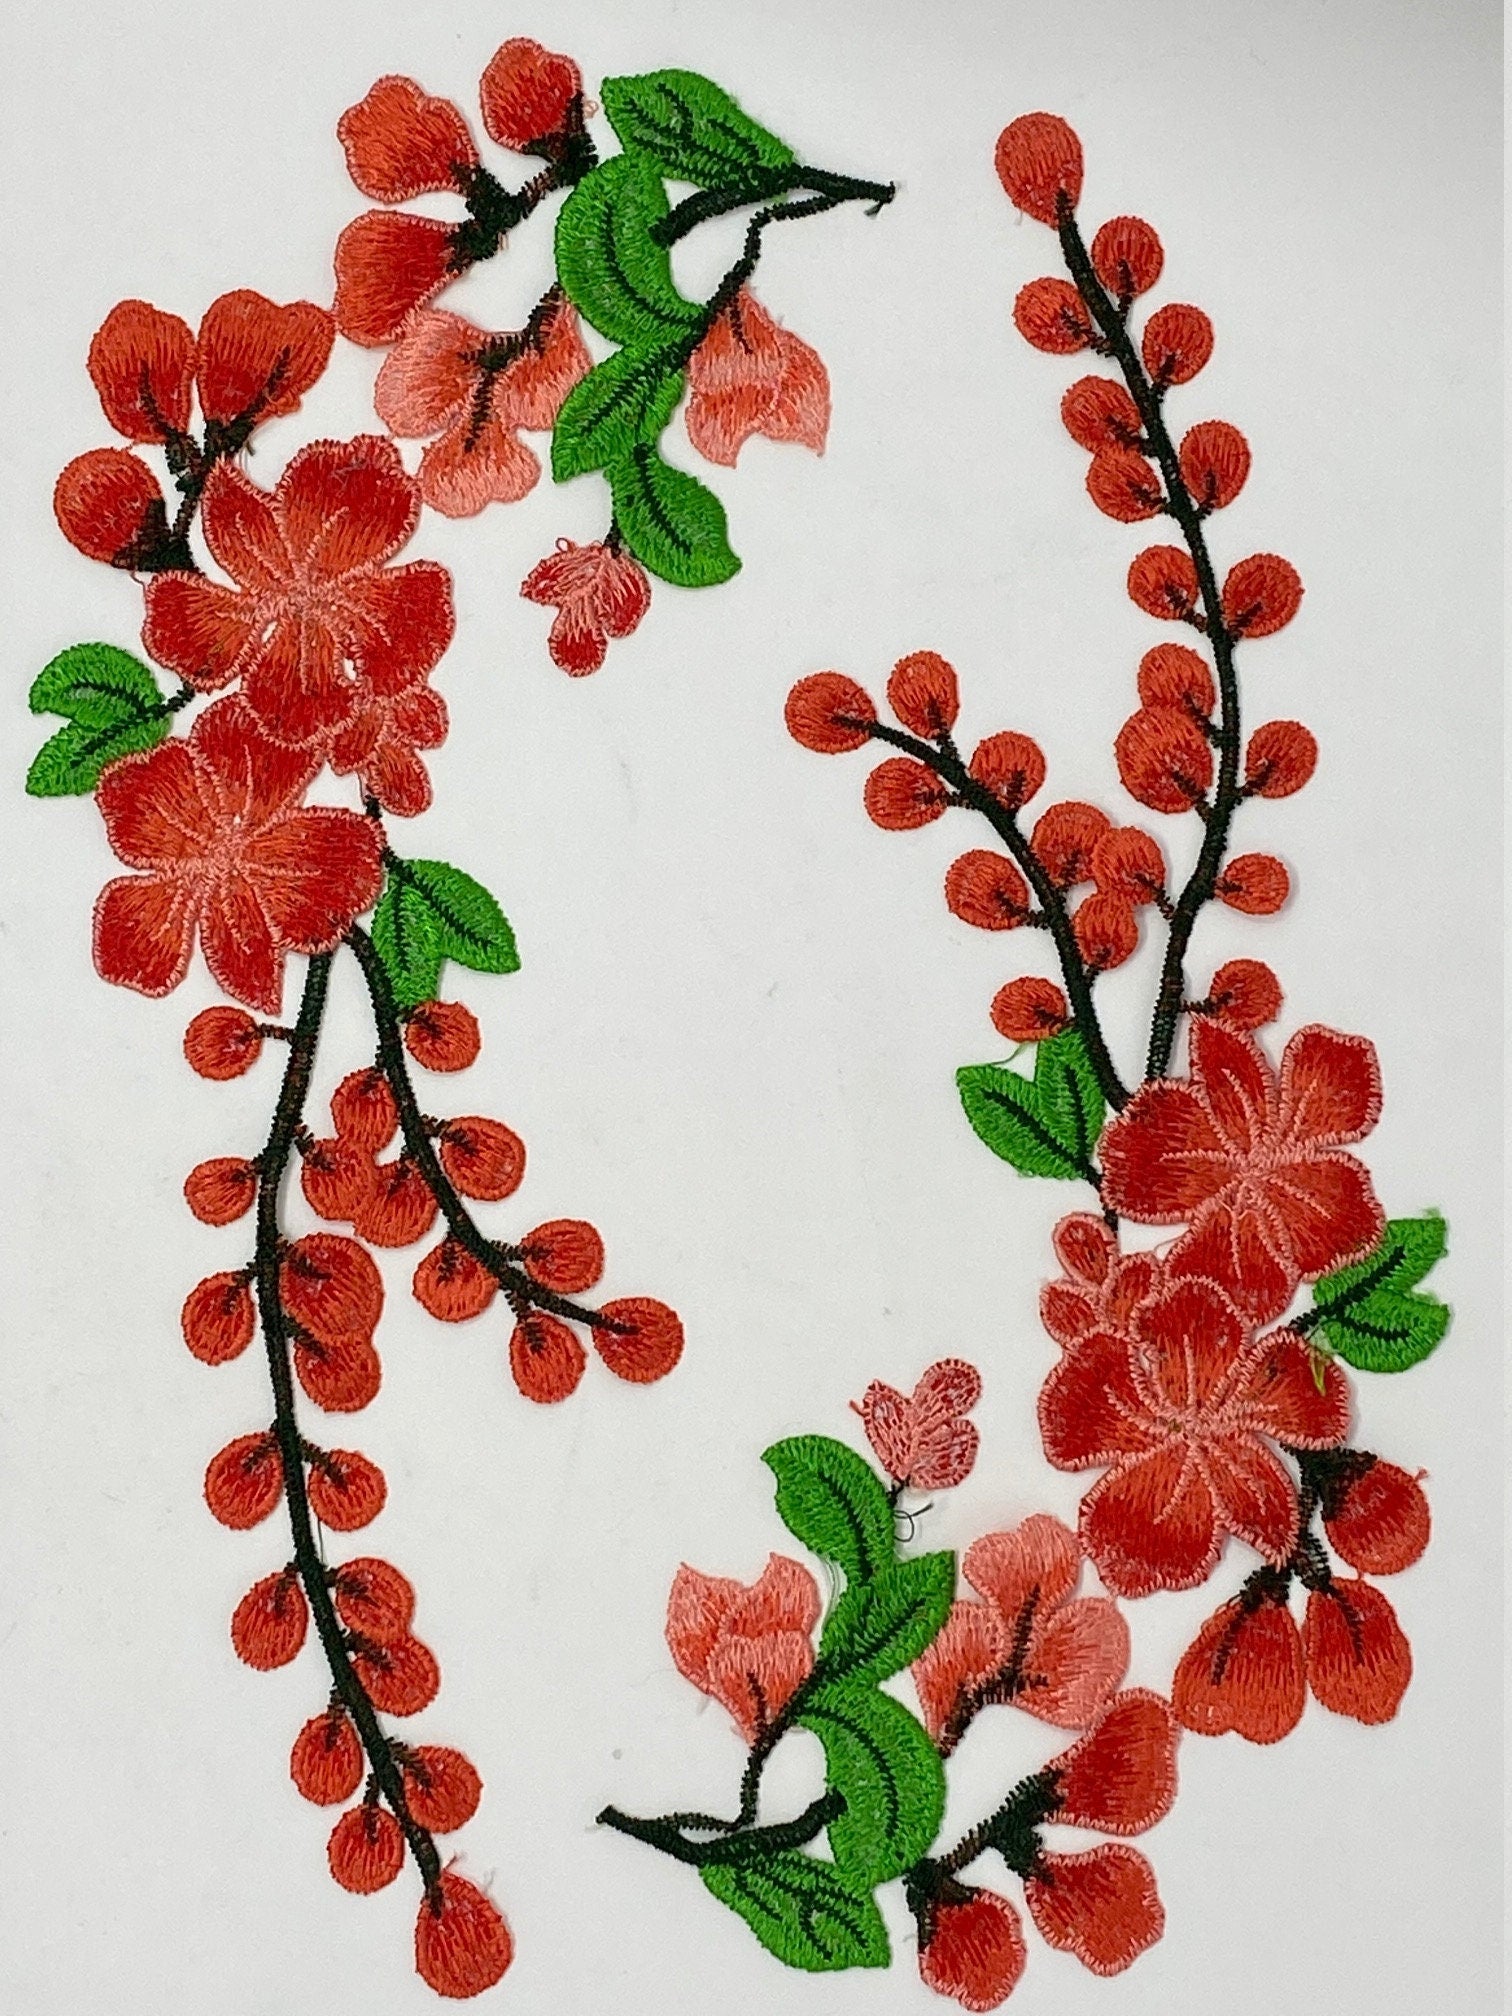 NEW, 2 Pc., Red Lace Flowers with Leaves and Stems, Sew-on Lace Flower Set, Great for Shoes, Denim,Jackets, Sweaters, Etc. Size 12 inches